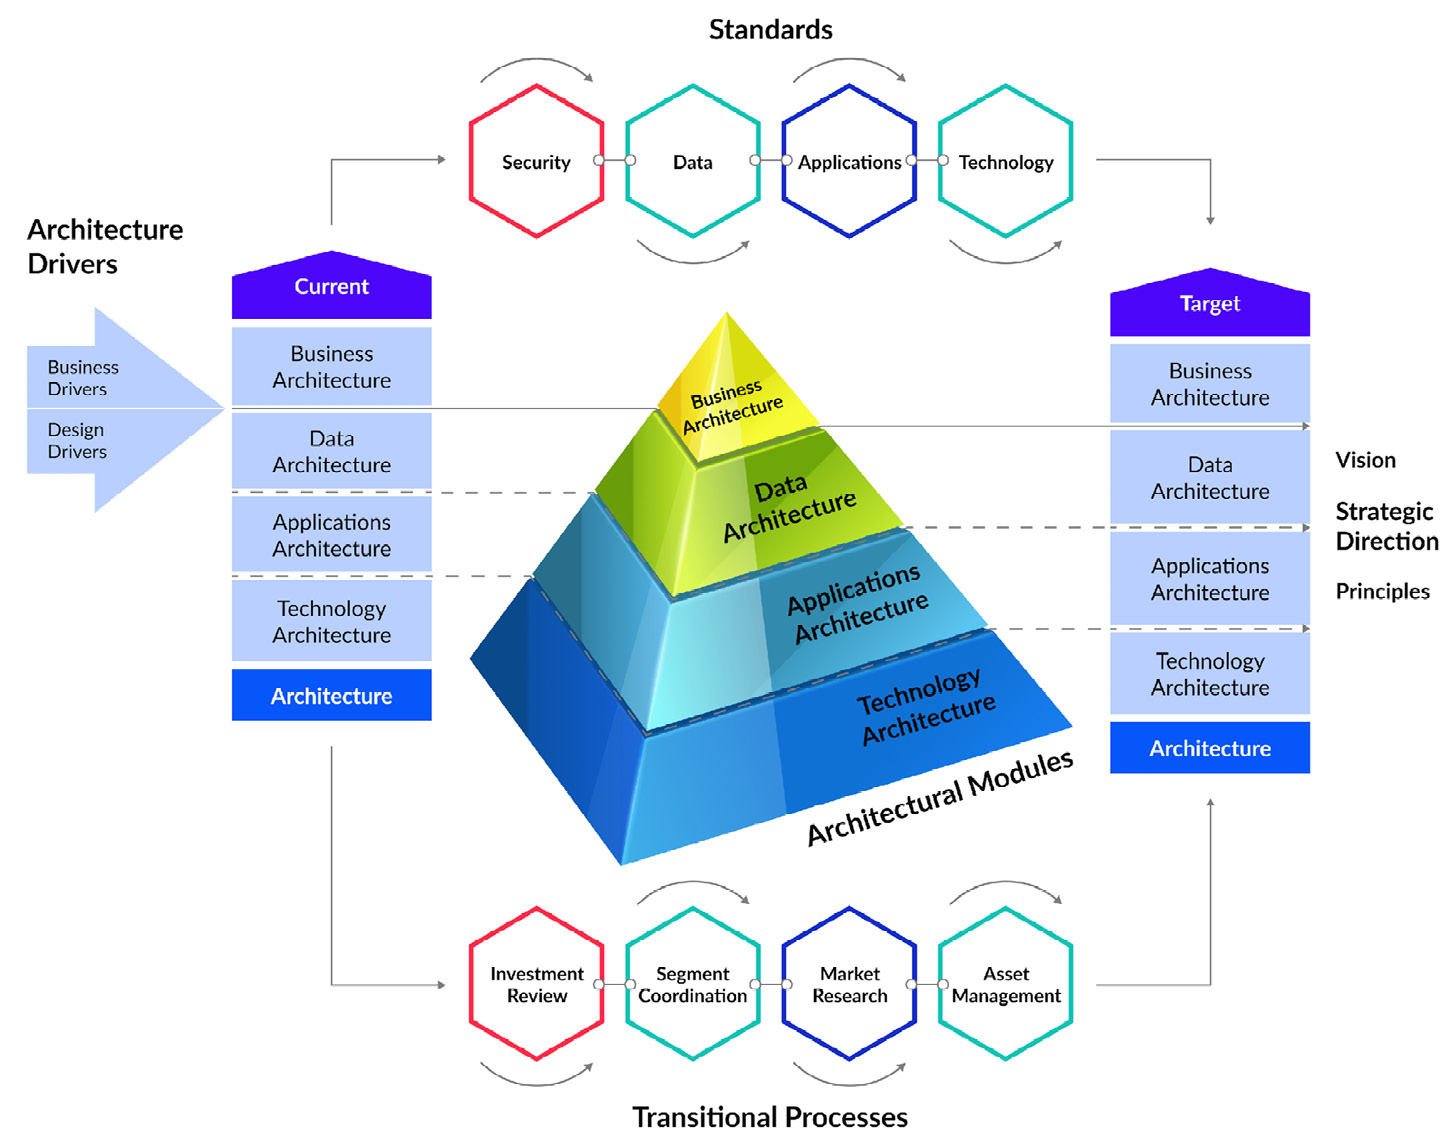 Figure 2.1 – The standards and transitional processes within an architecture model
